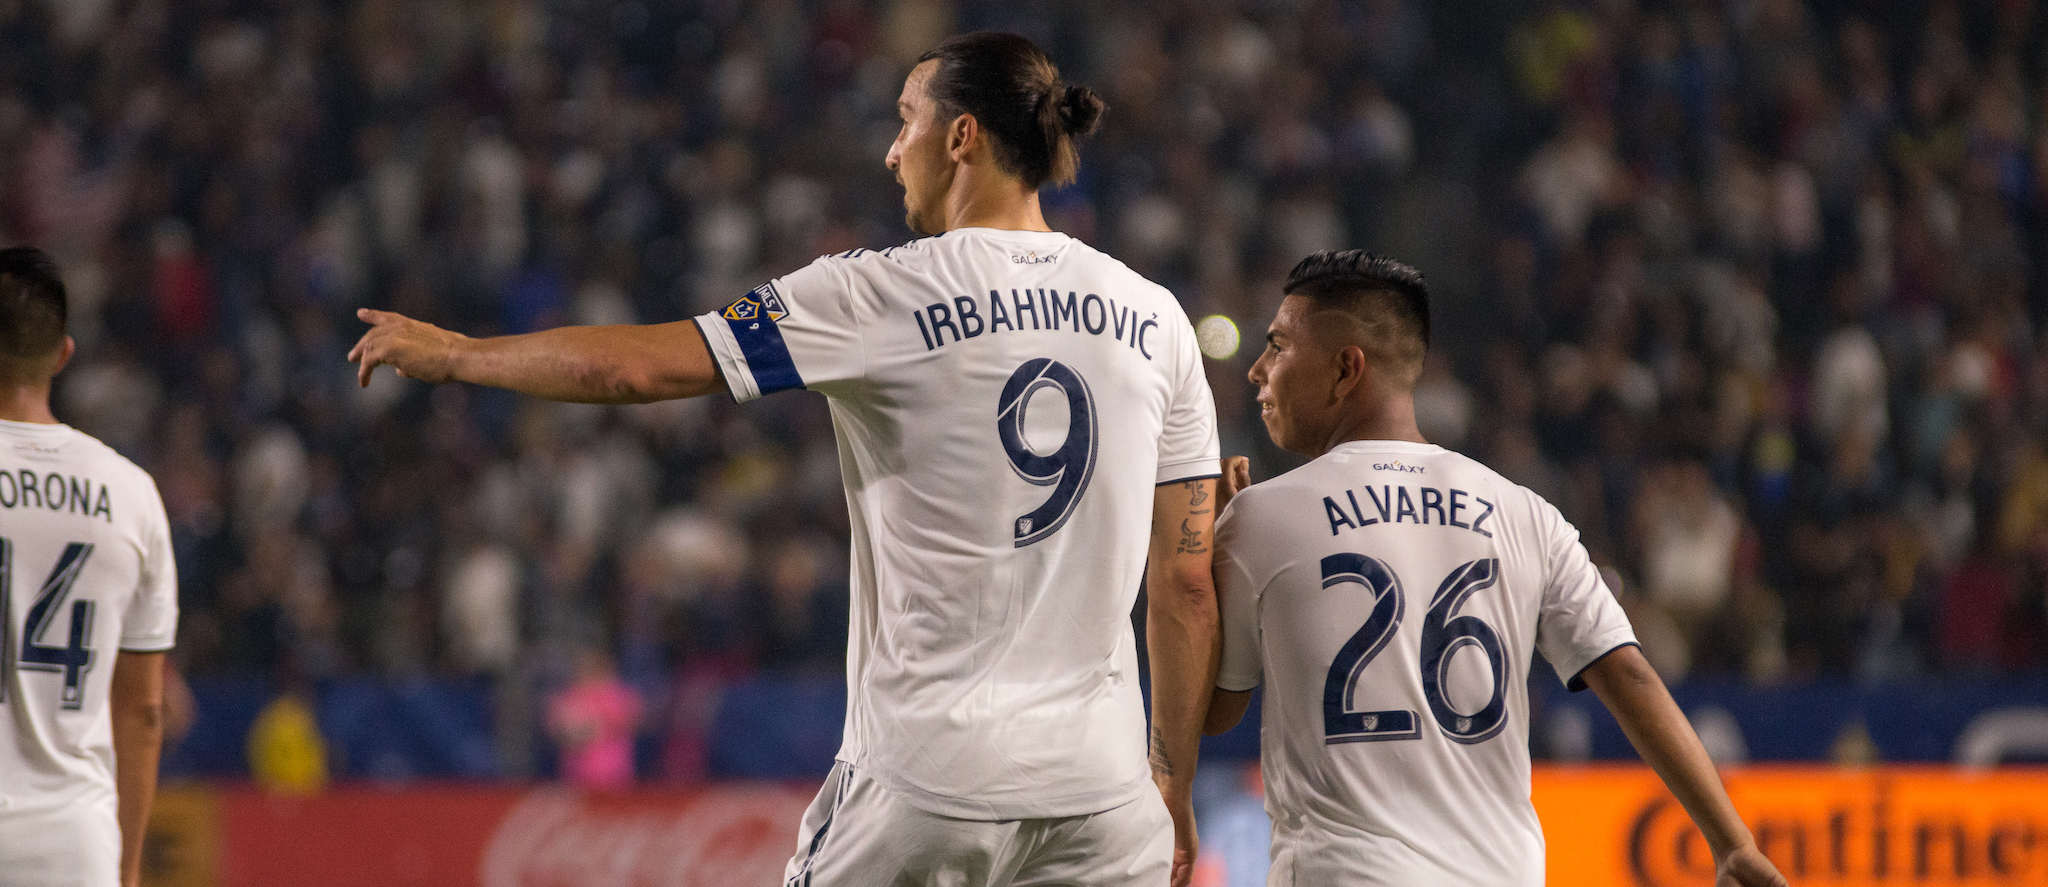 Zlatan Ibrahimovic and Efrain Alvarez after the Galaxy scored against Toronto FC on July 4, 2019